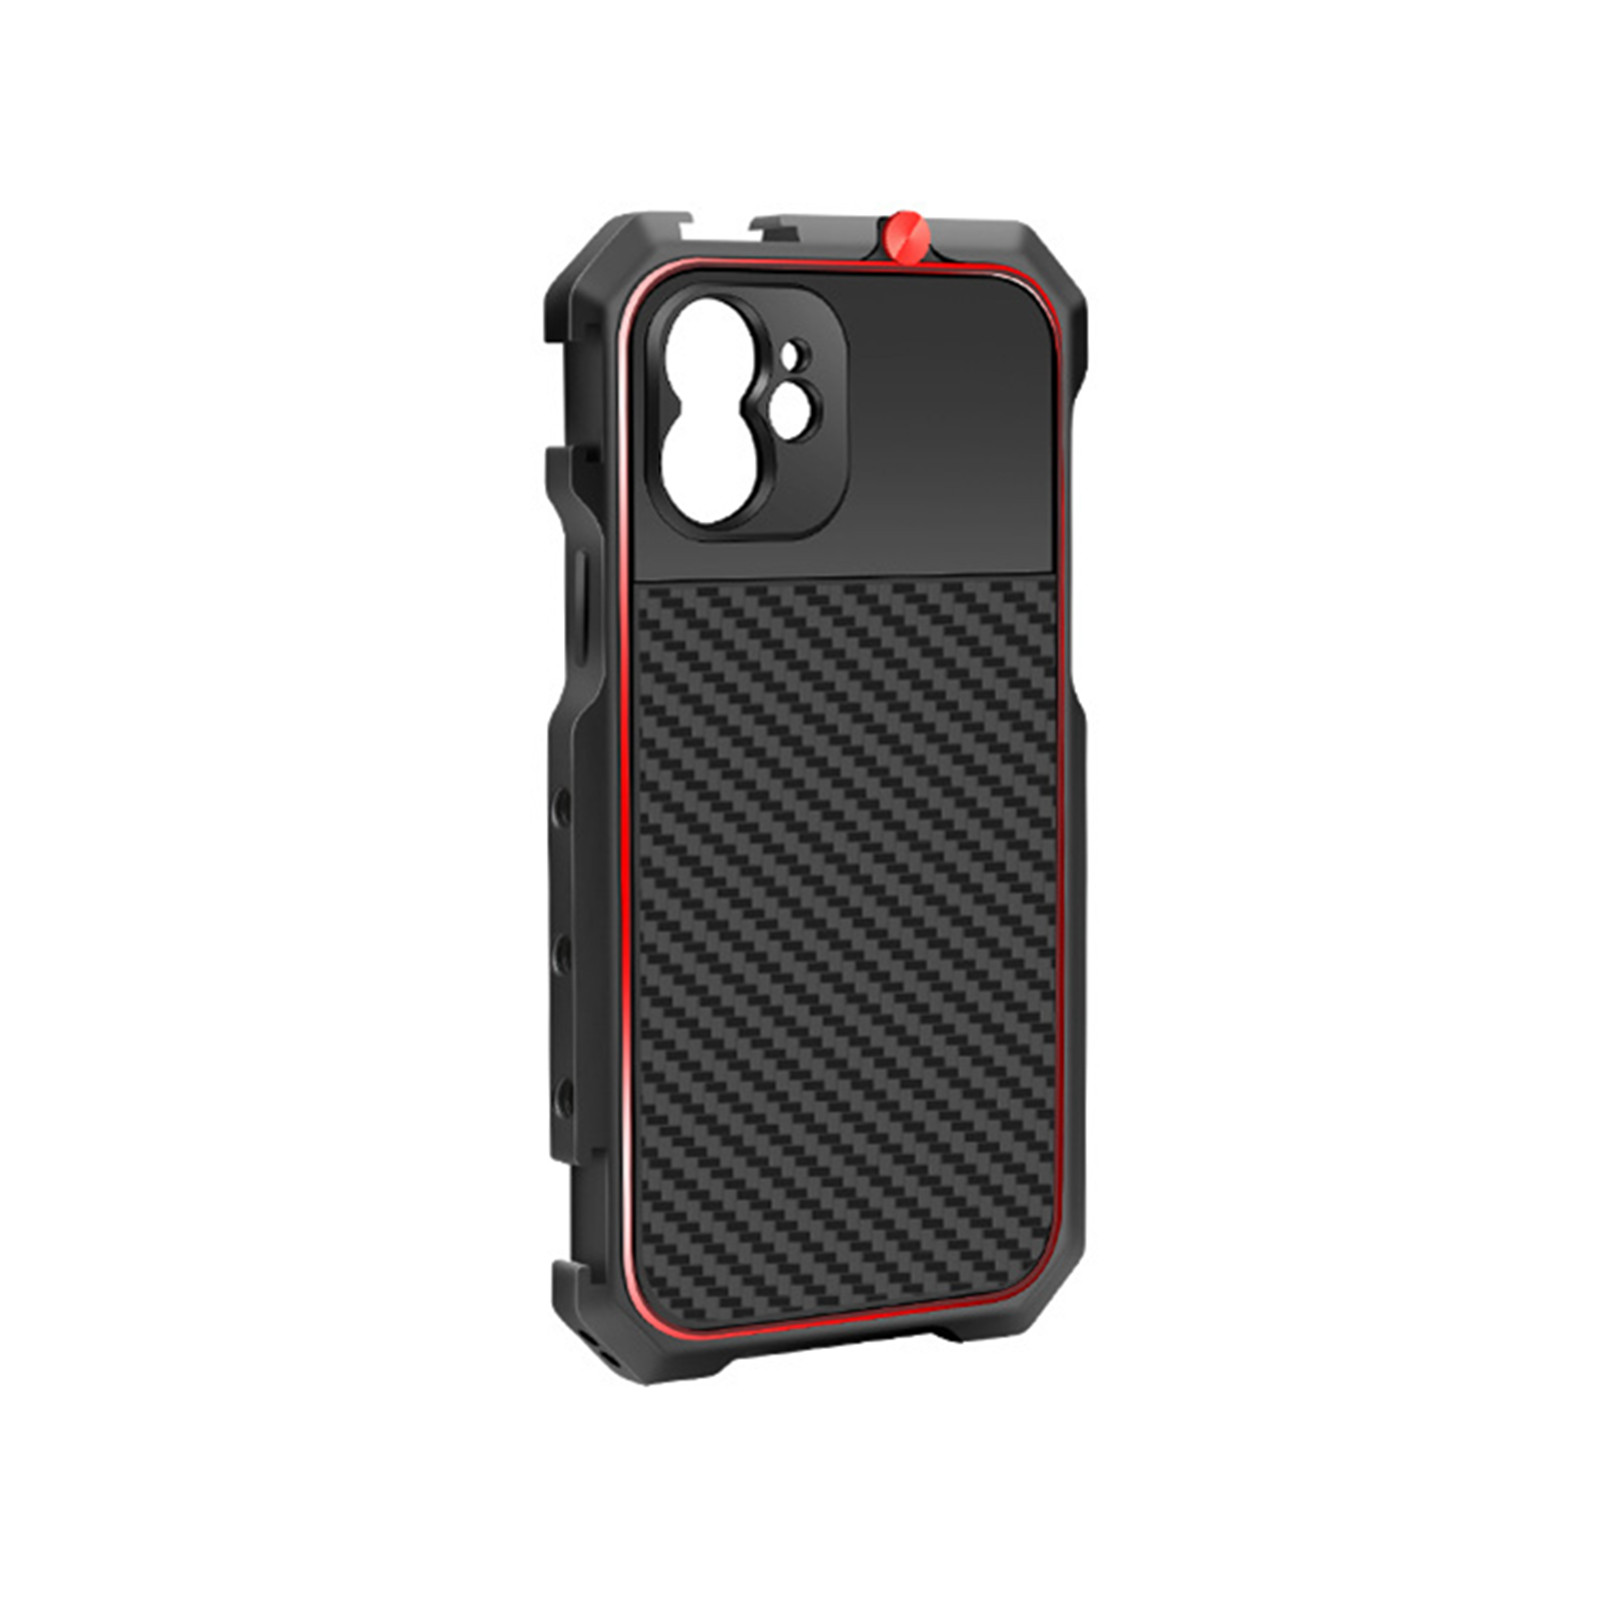 MOSHUSO P12 Phone Video Cage for iPhone 12